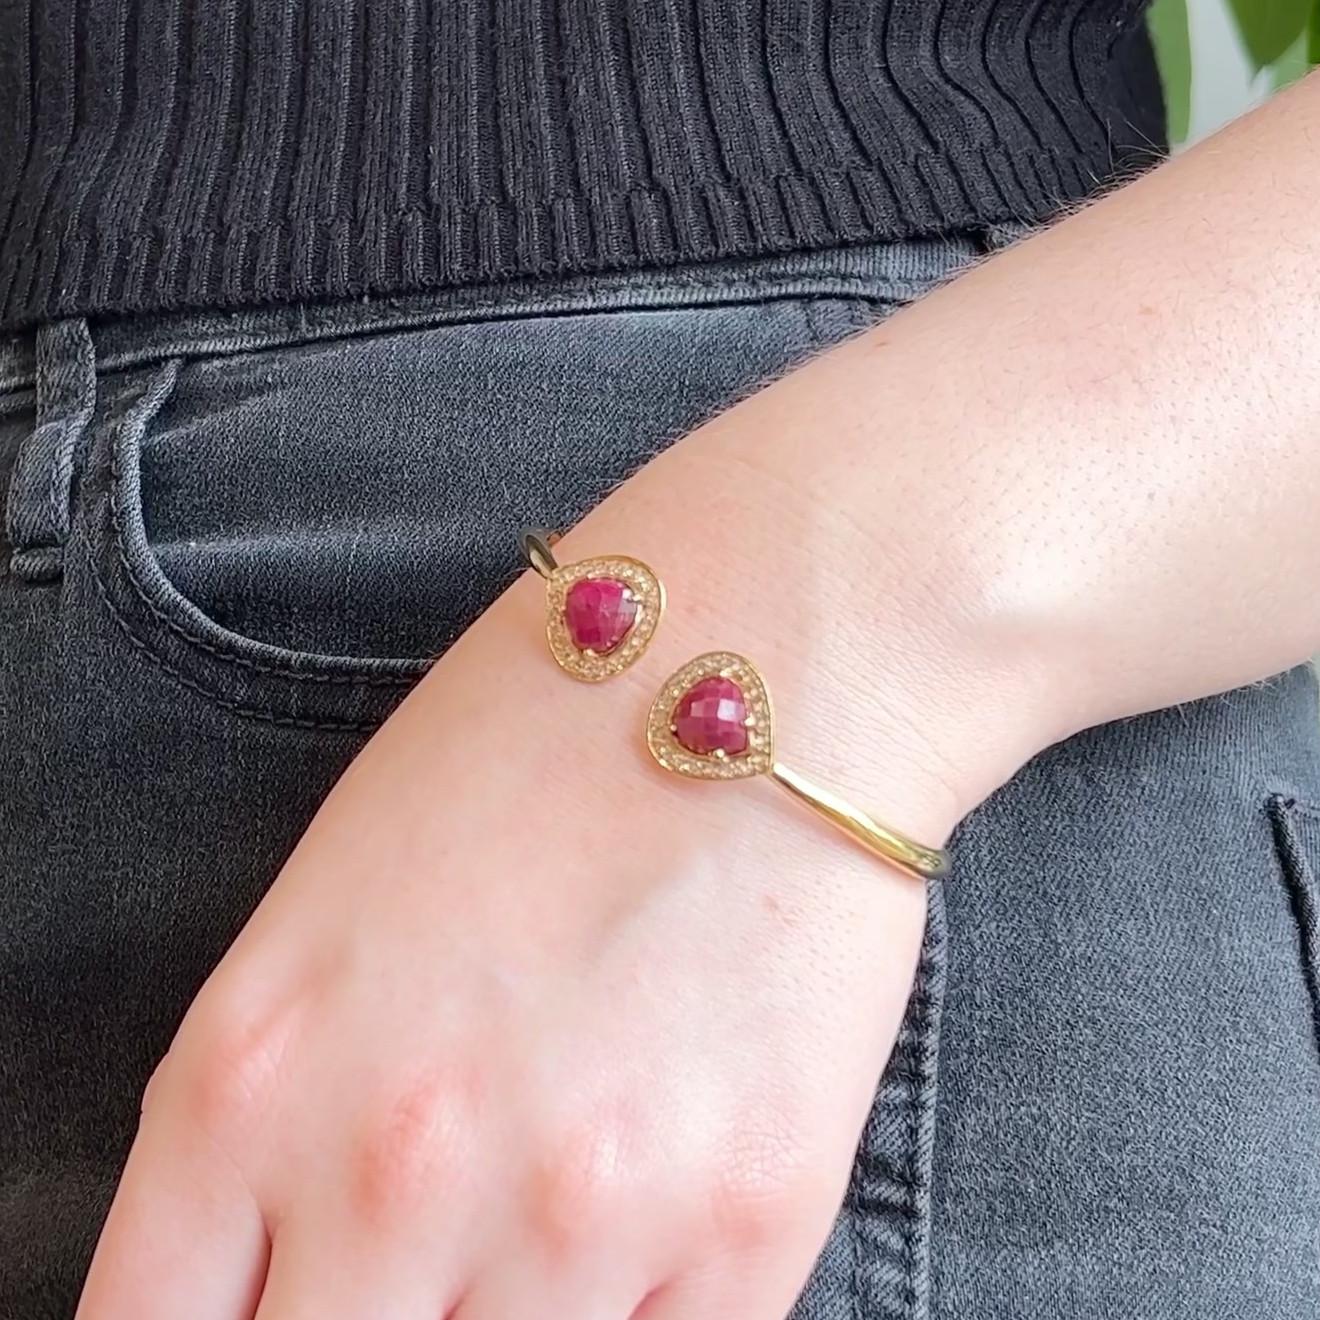 One Vintage Ruby Diamond 18 Karat Yellow Gold Cuff Bracelet. Featuring two pear shaped checkerboard cabochon cut rubies with a total weight of approximately 8.00 carats. Accented by 44 round brilliant cut diamonds with a total weight of